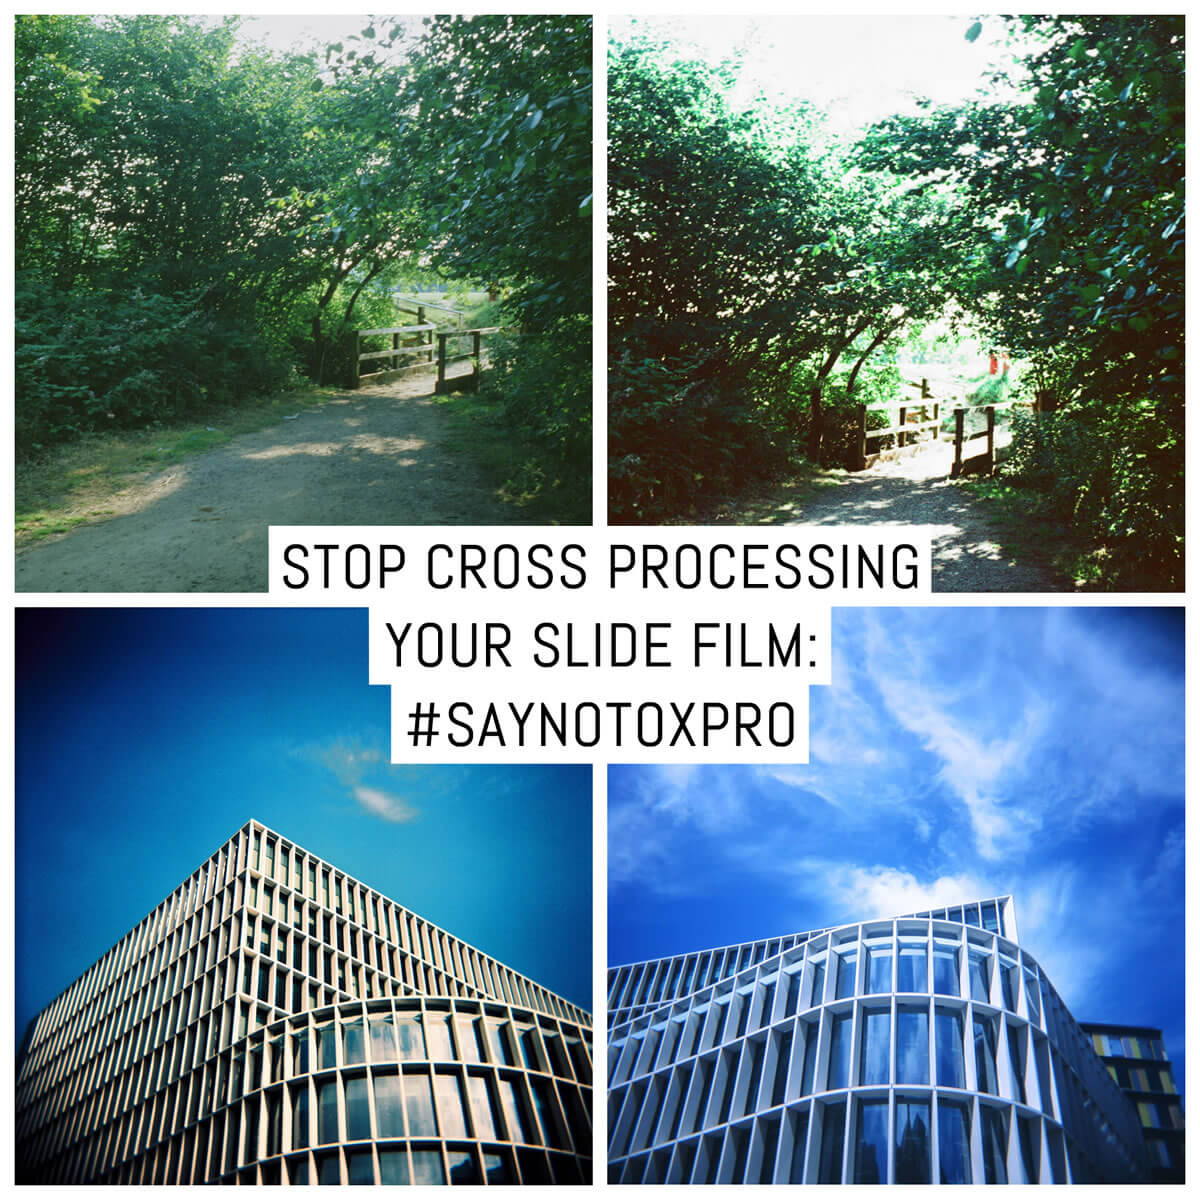 Stop cross processing your slide film: #Saynotoxpro